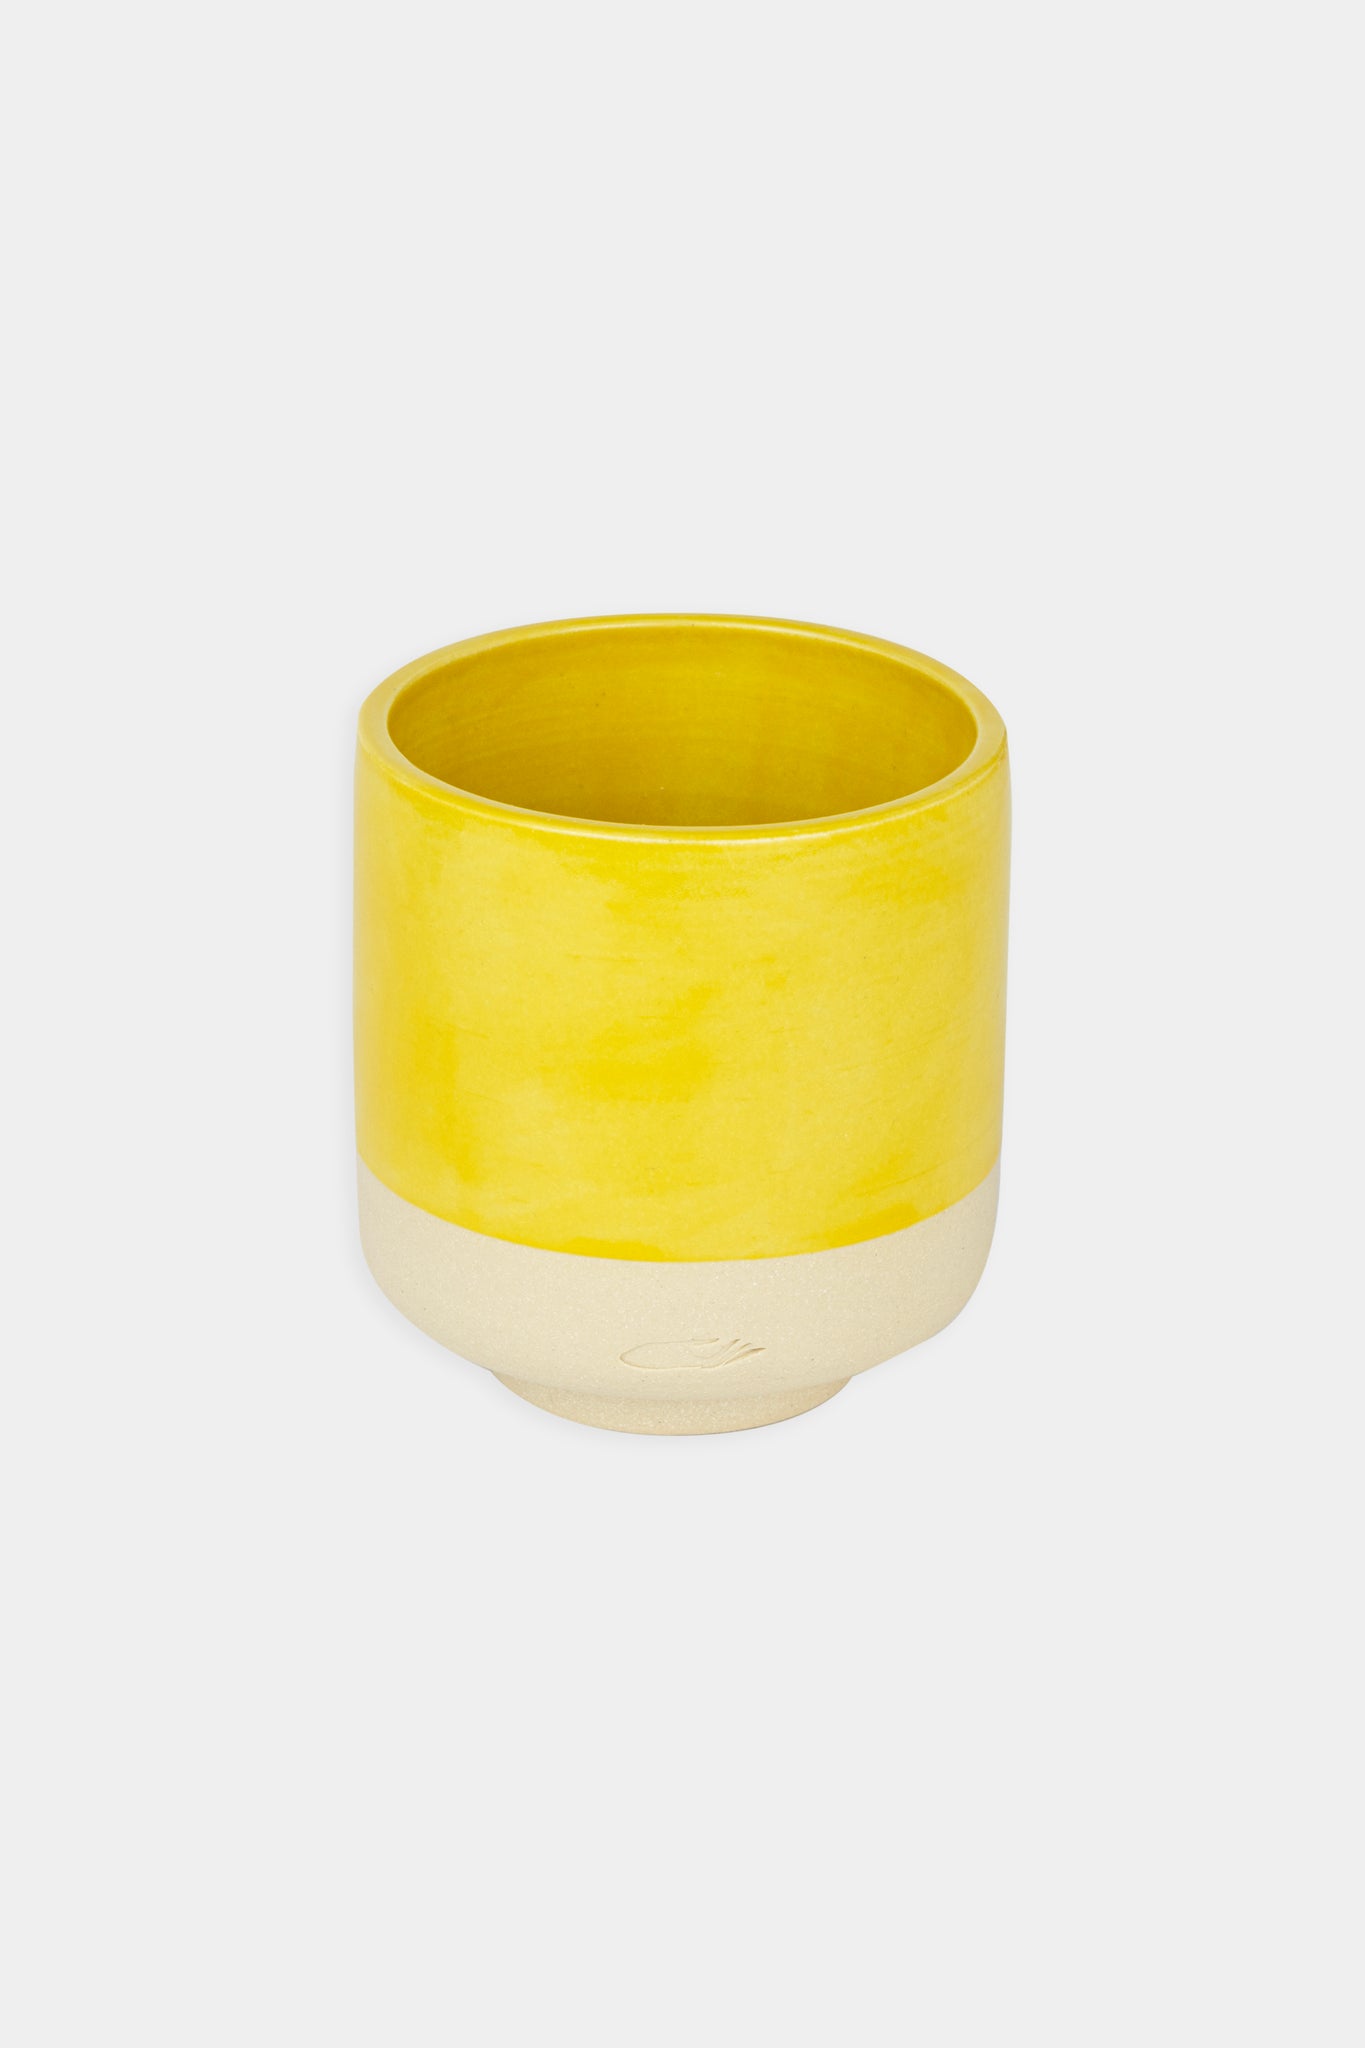 Provide yellow glazed ceramic cup with hand logo imprint